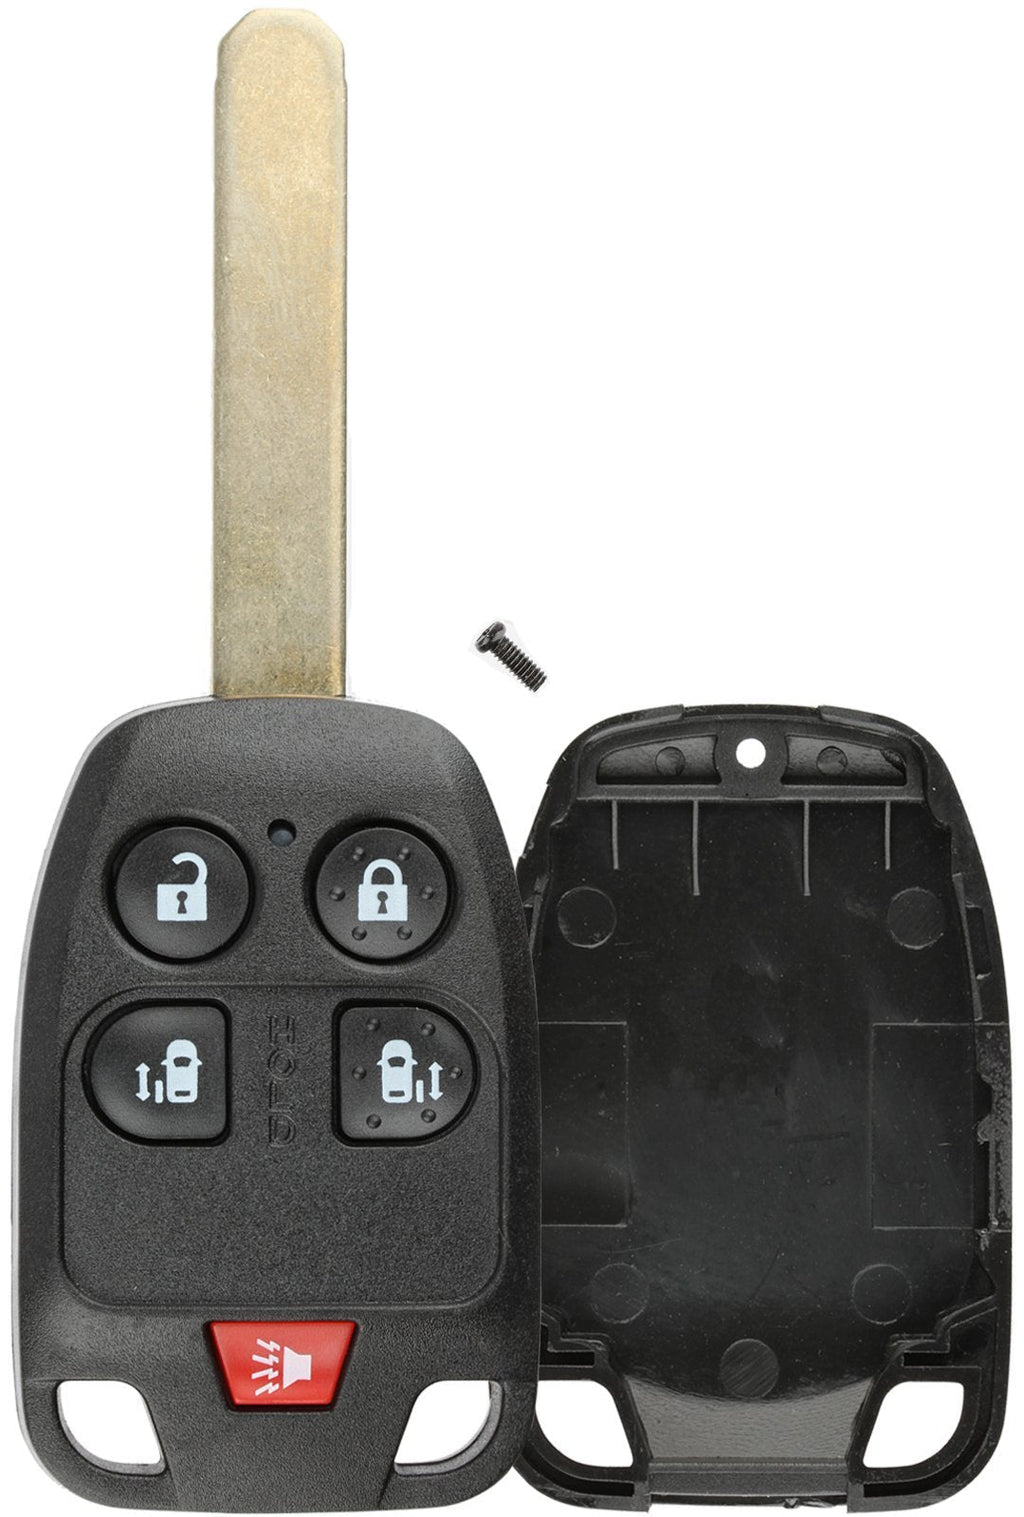  [AUSTRALIA] - KeylessOption Keyless Entry Remote Uncut Blank Key Blade Fob Shell Case Cover Buttons For Odyssey N5F-A04TAA